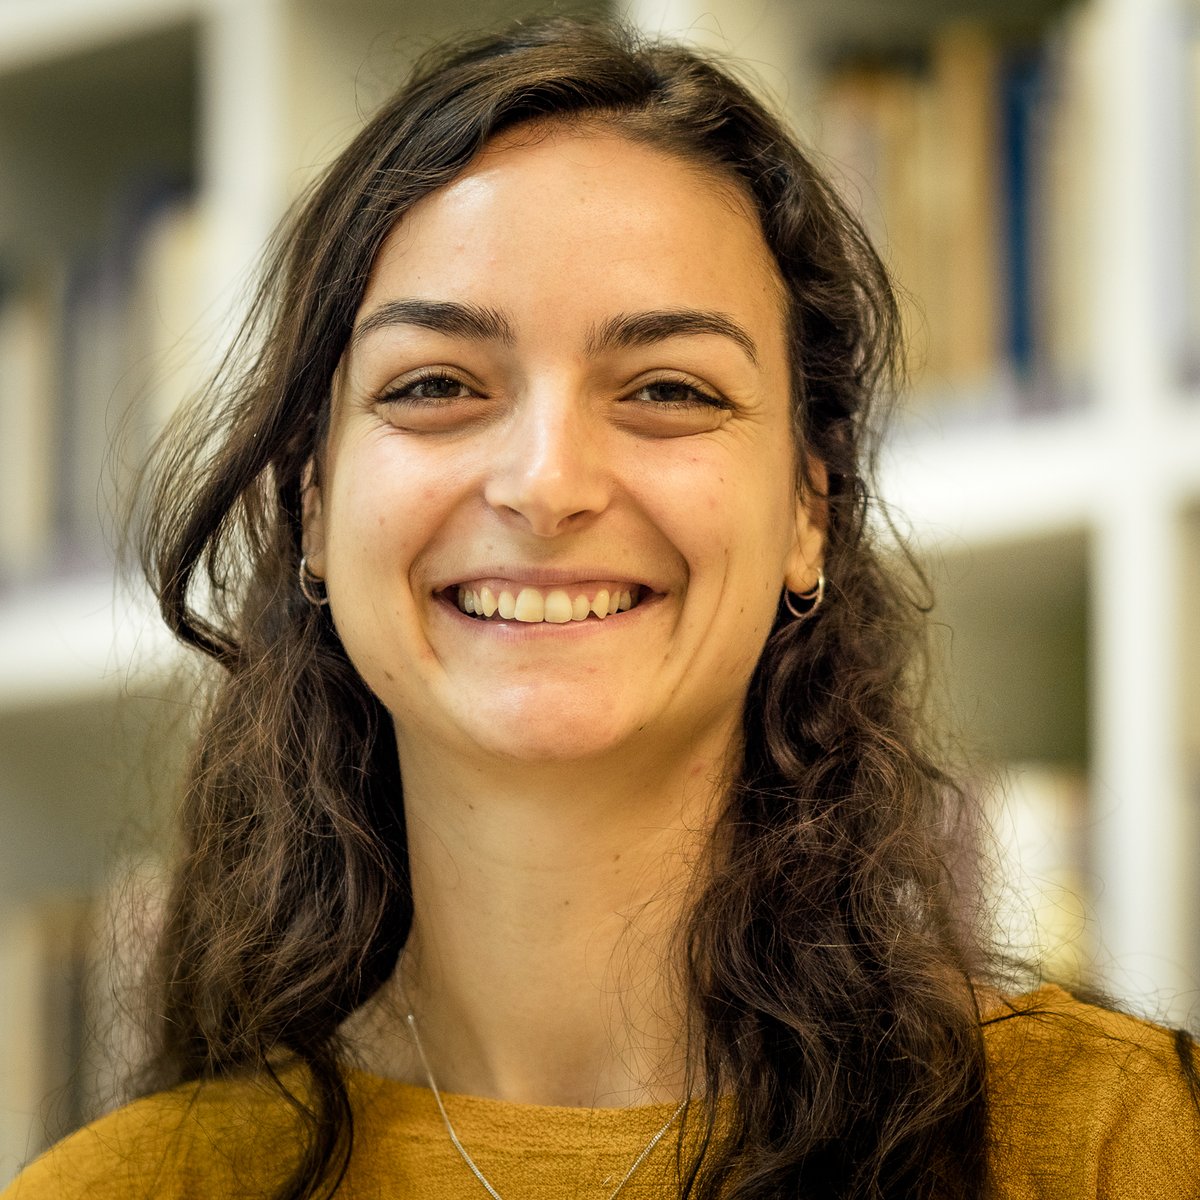 #DondersDefence📣 Tomorrow at 14:30 @NaomiNota will defend 'Talking faces: The contribution of conversational facial signals to language use and processing' on the intricate dance of #facial movements to study their role in #language use and #comprehension. Good luck!!🍀🎉